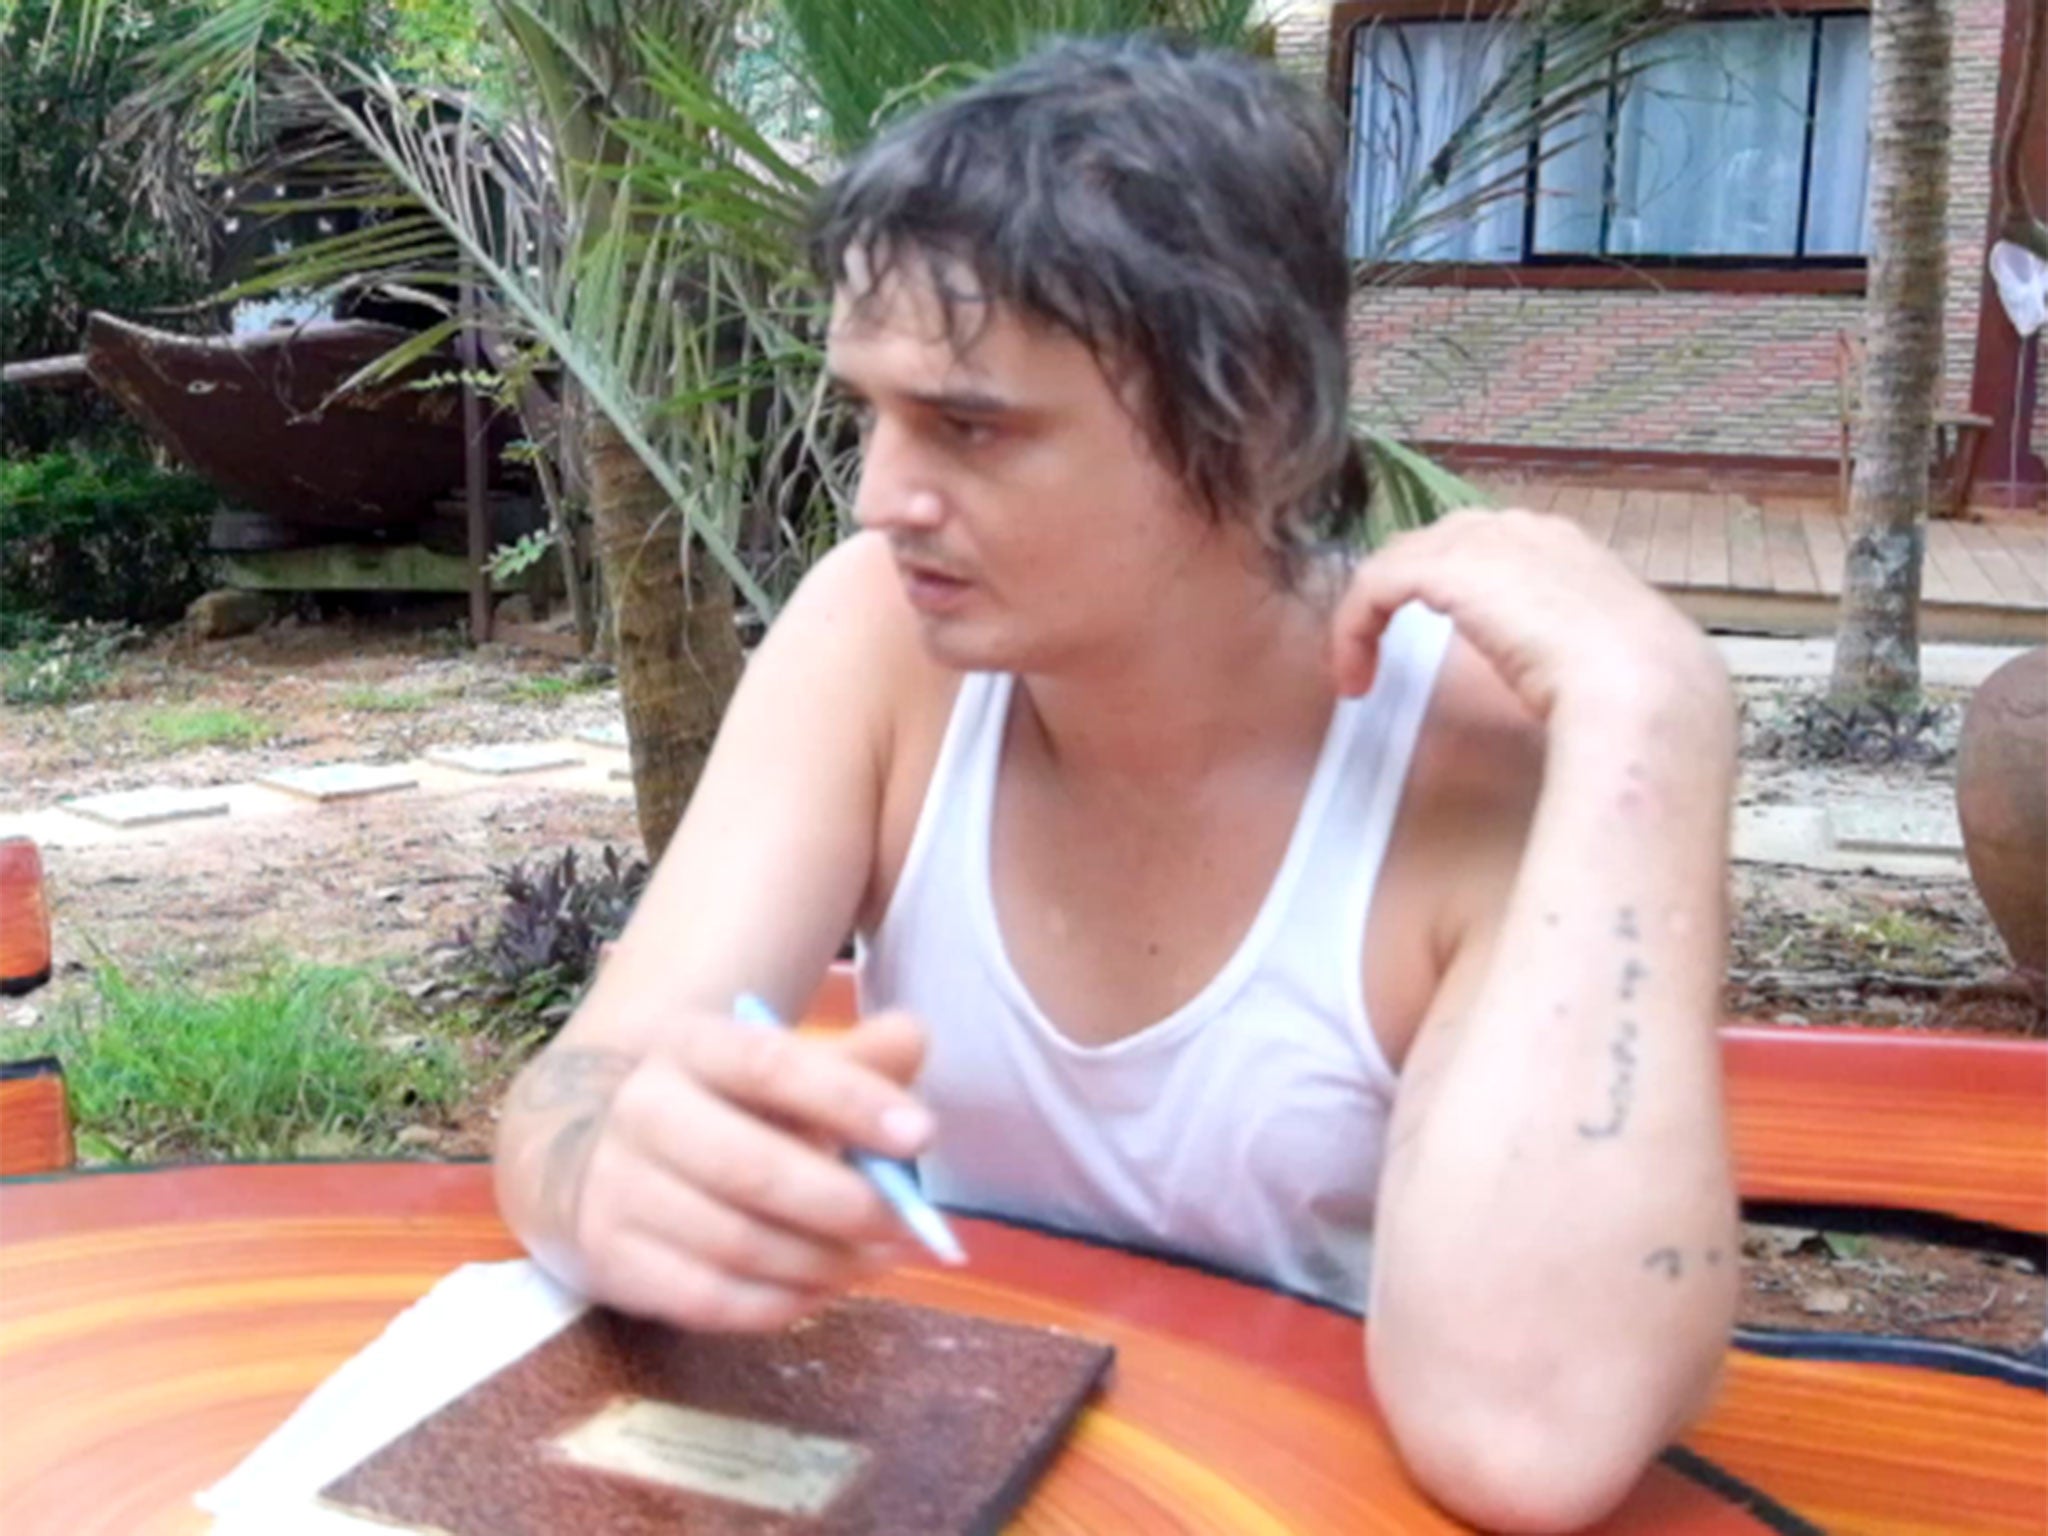 Pete Doherty at the Hope Rehab Centre in Thailand.